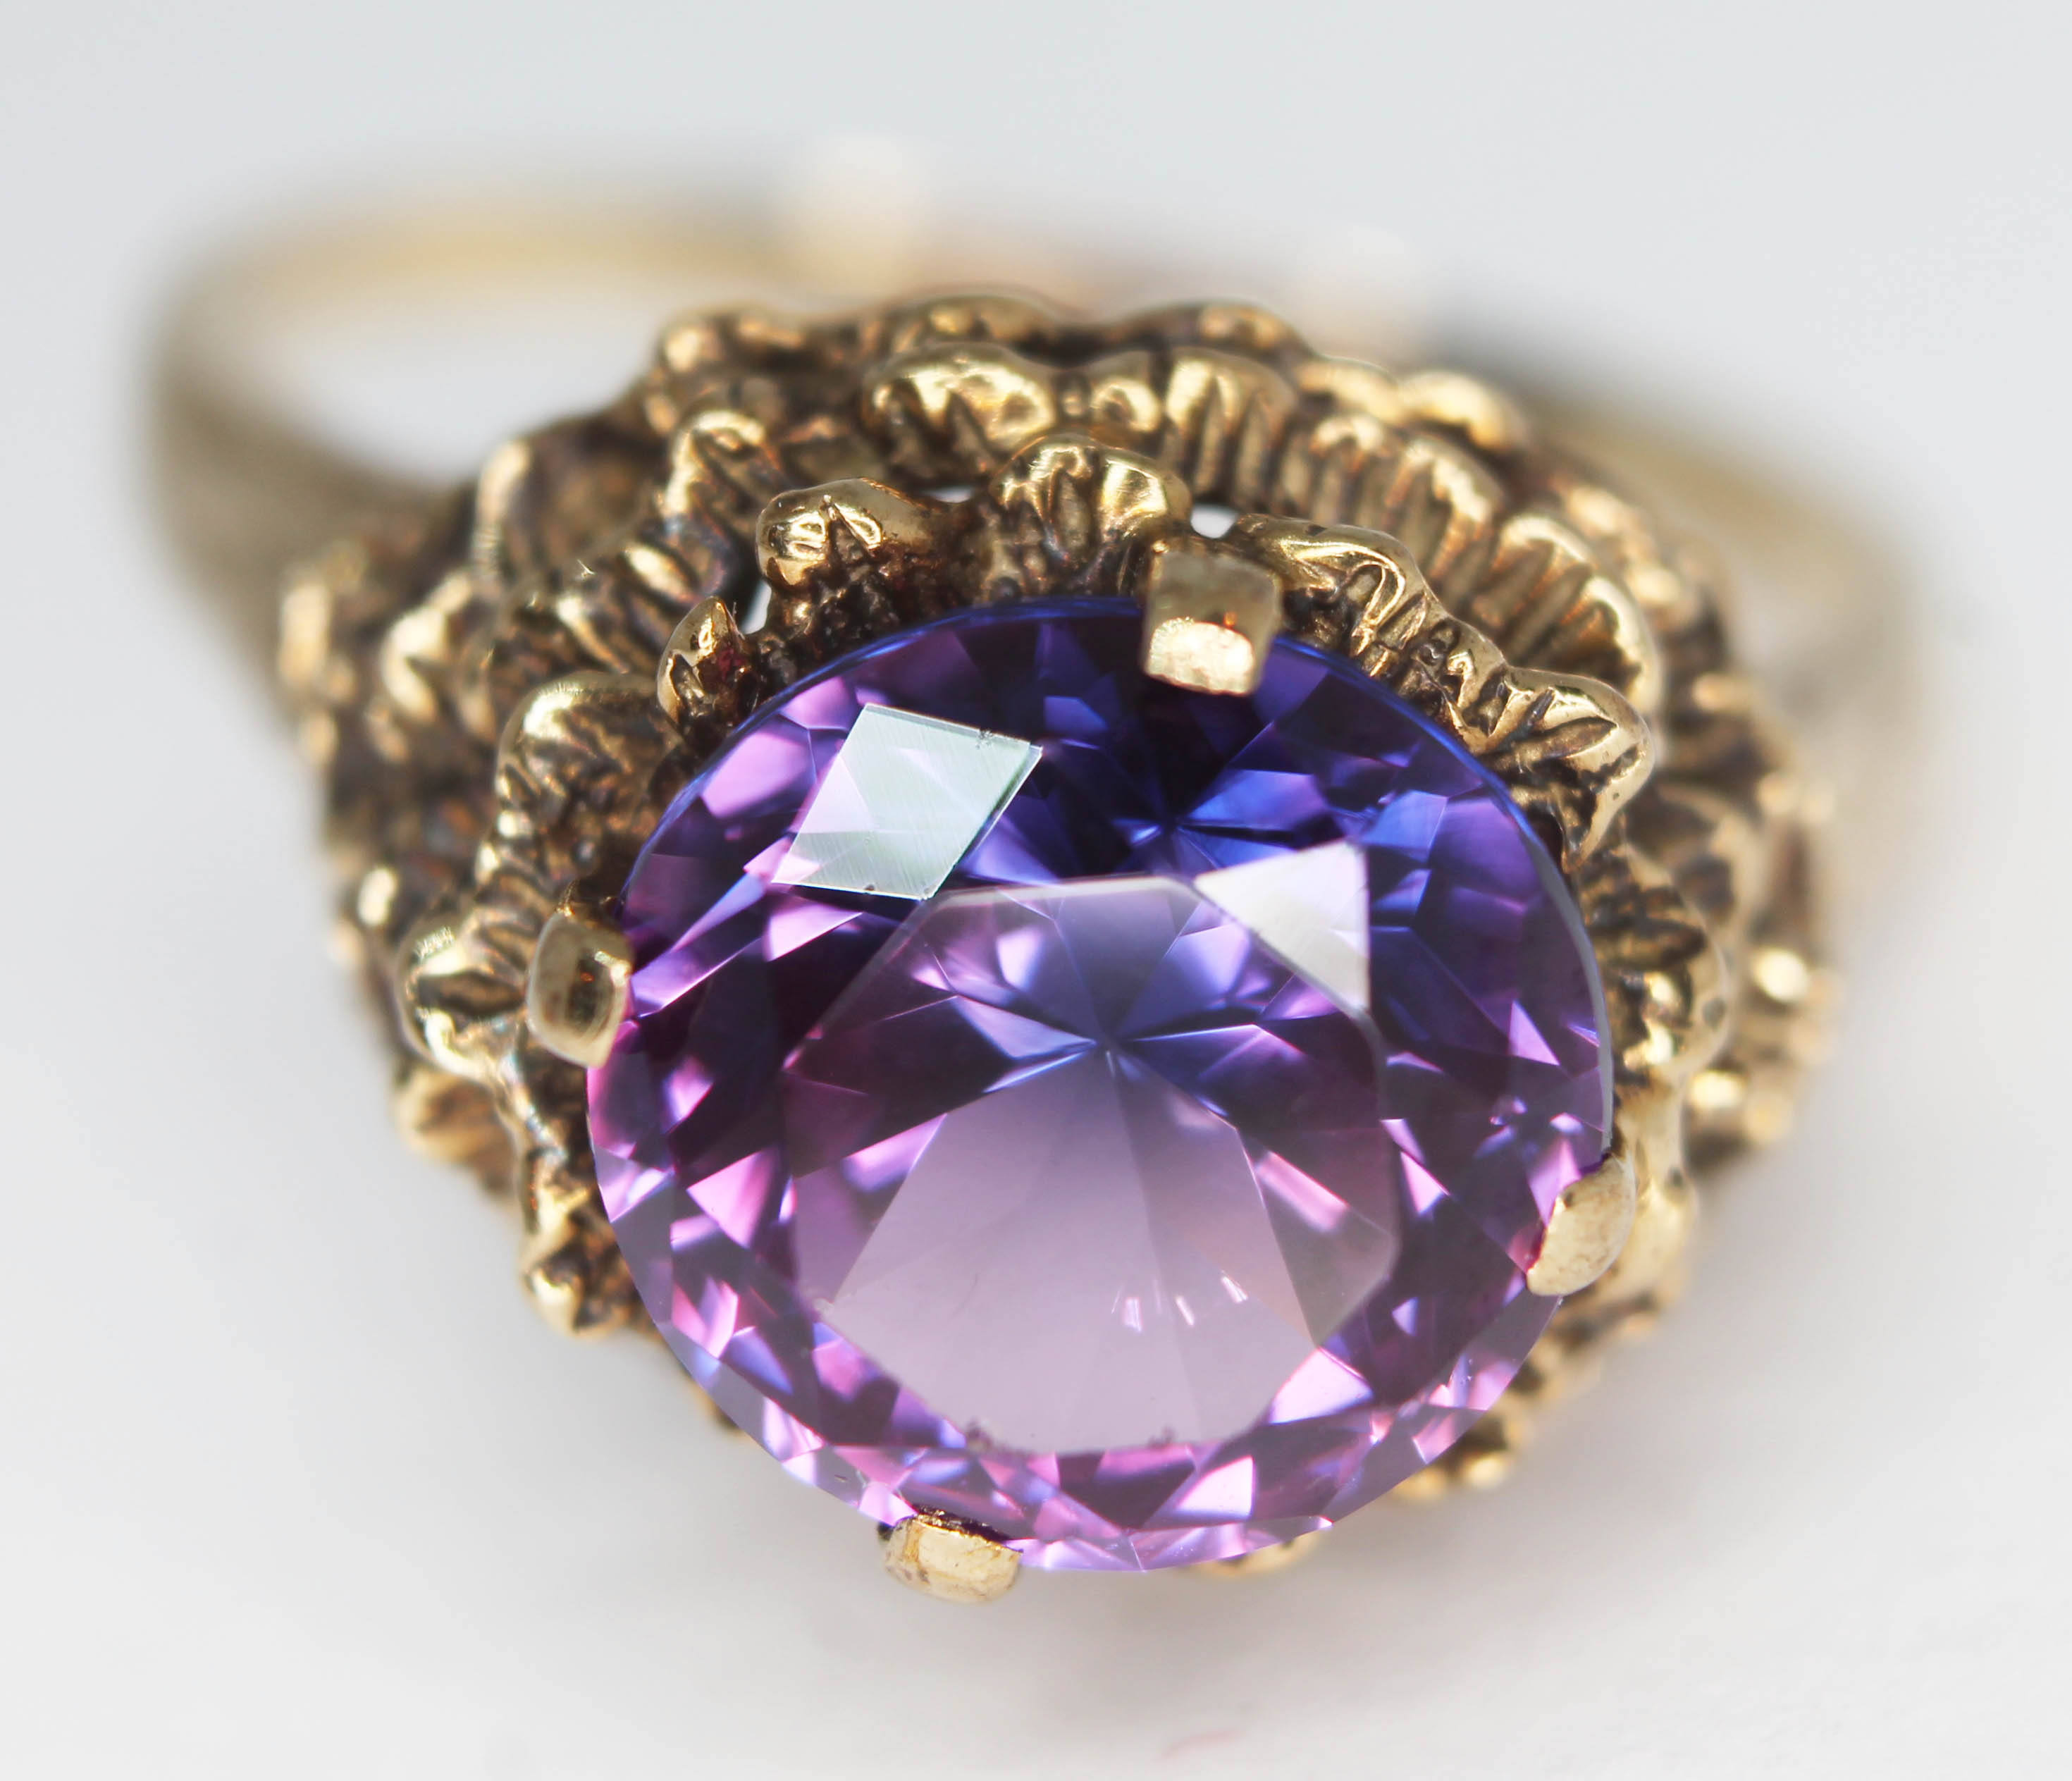 A 9ct gold ring set with a round brilliant cut amethyst, the stone approx. 4.44 carats, band